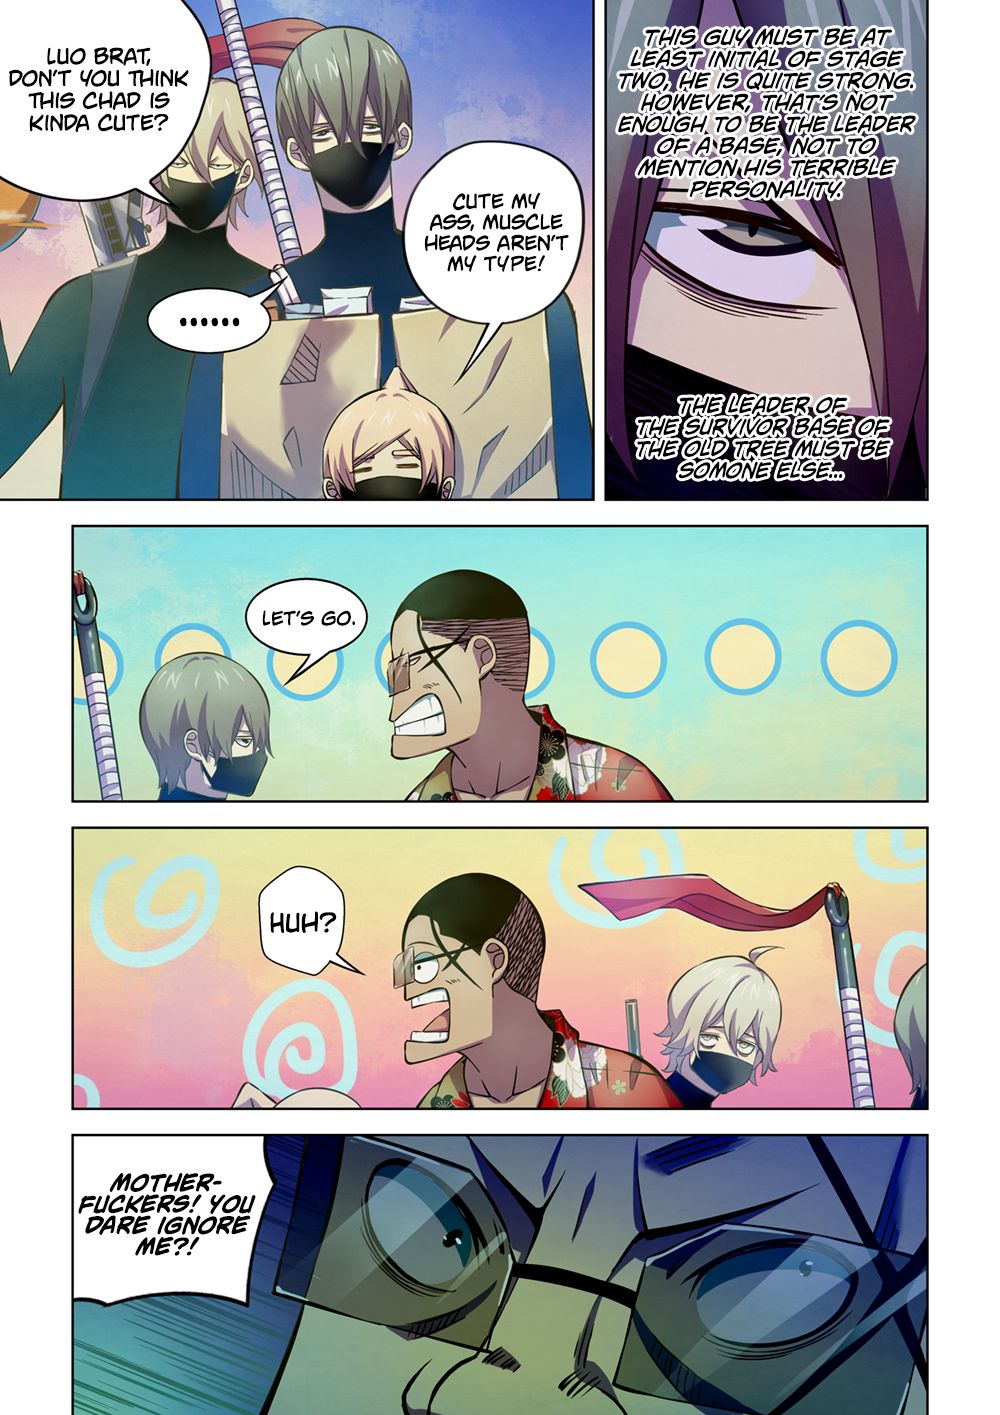 The Last Human Chapter 207 Page 3